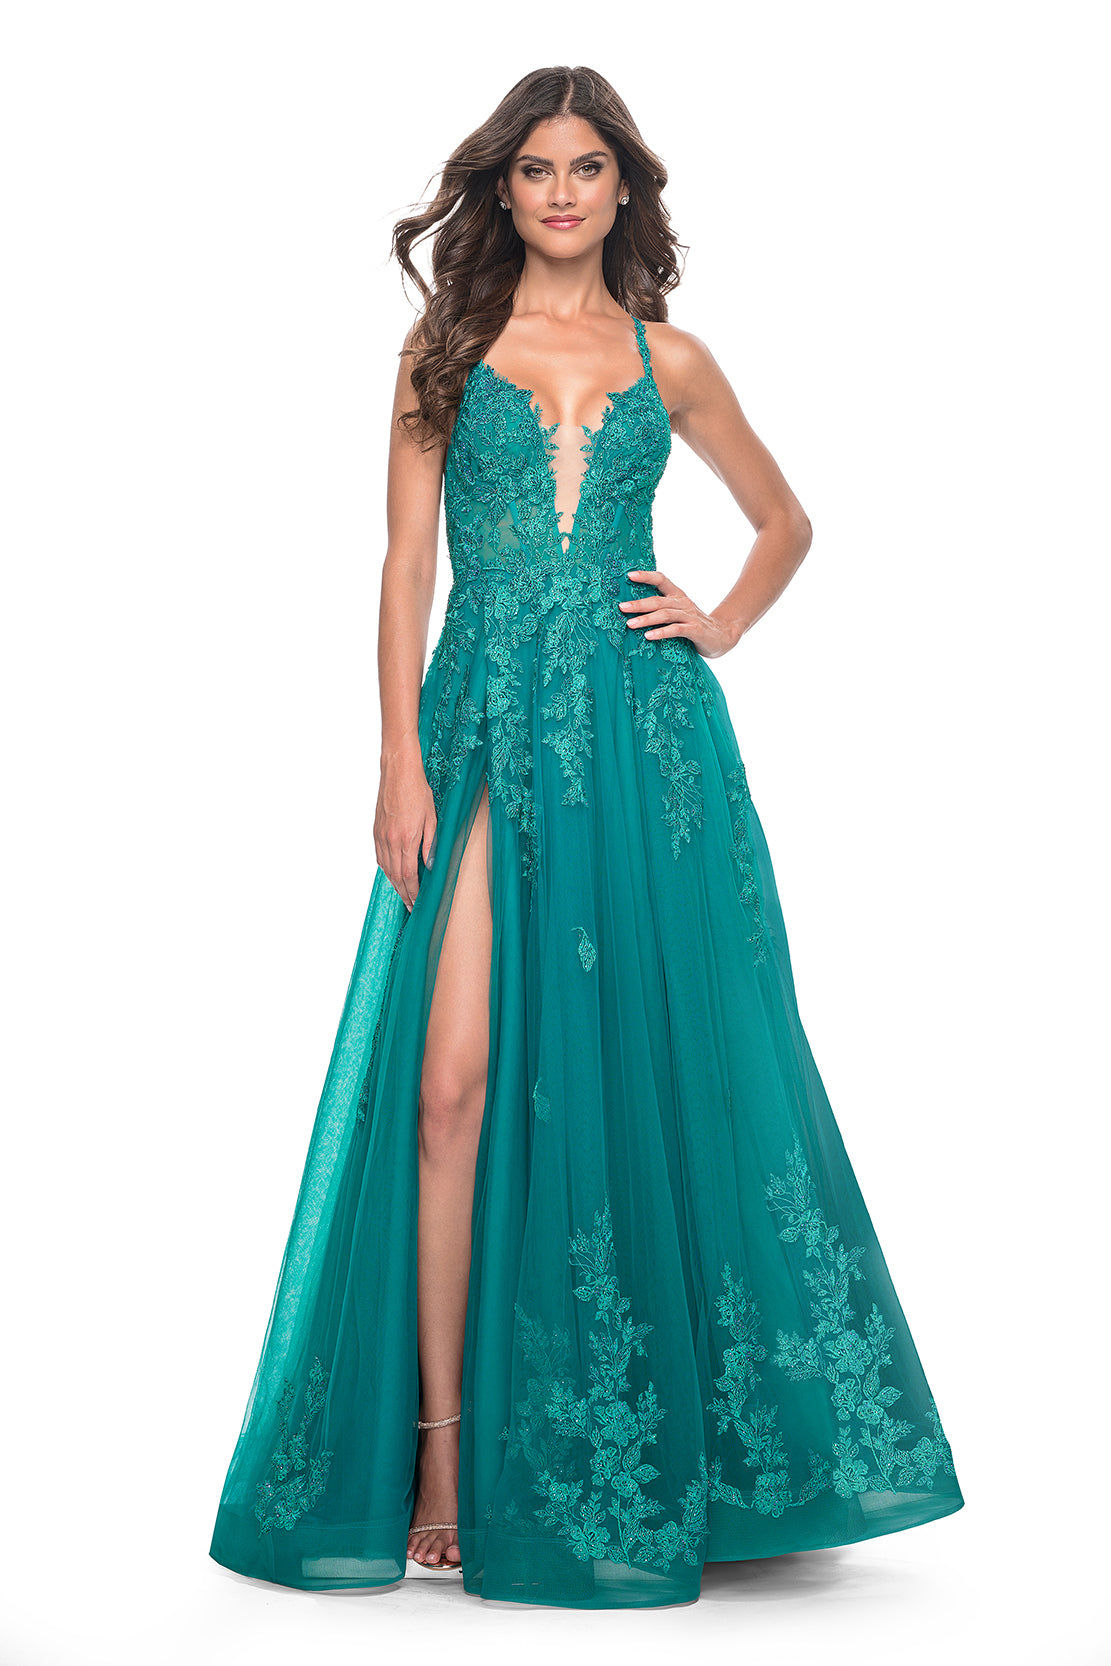 La Femme 32062 A-Line Lace Applique Prom Gown - An enchanting A-line gown featuring a deep v-neck, high slit, lace applique embellished bodice, lace detailed hem, and a charming tie-up back. Perfect for prom or a quinceañera.  Model is wearing teal..